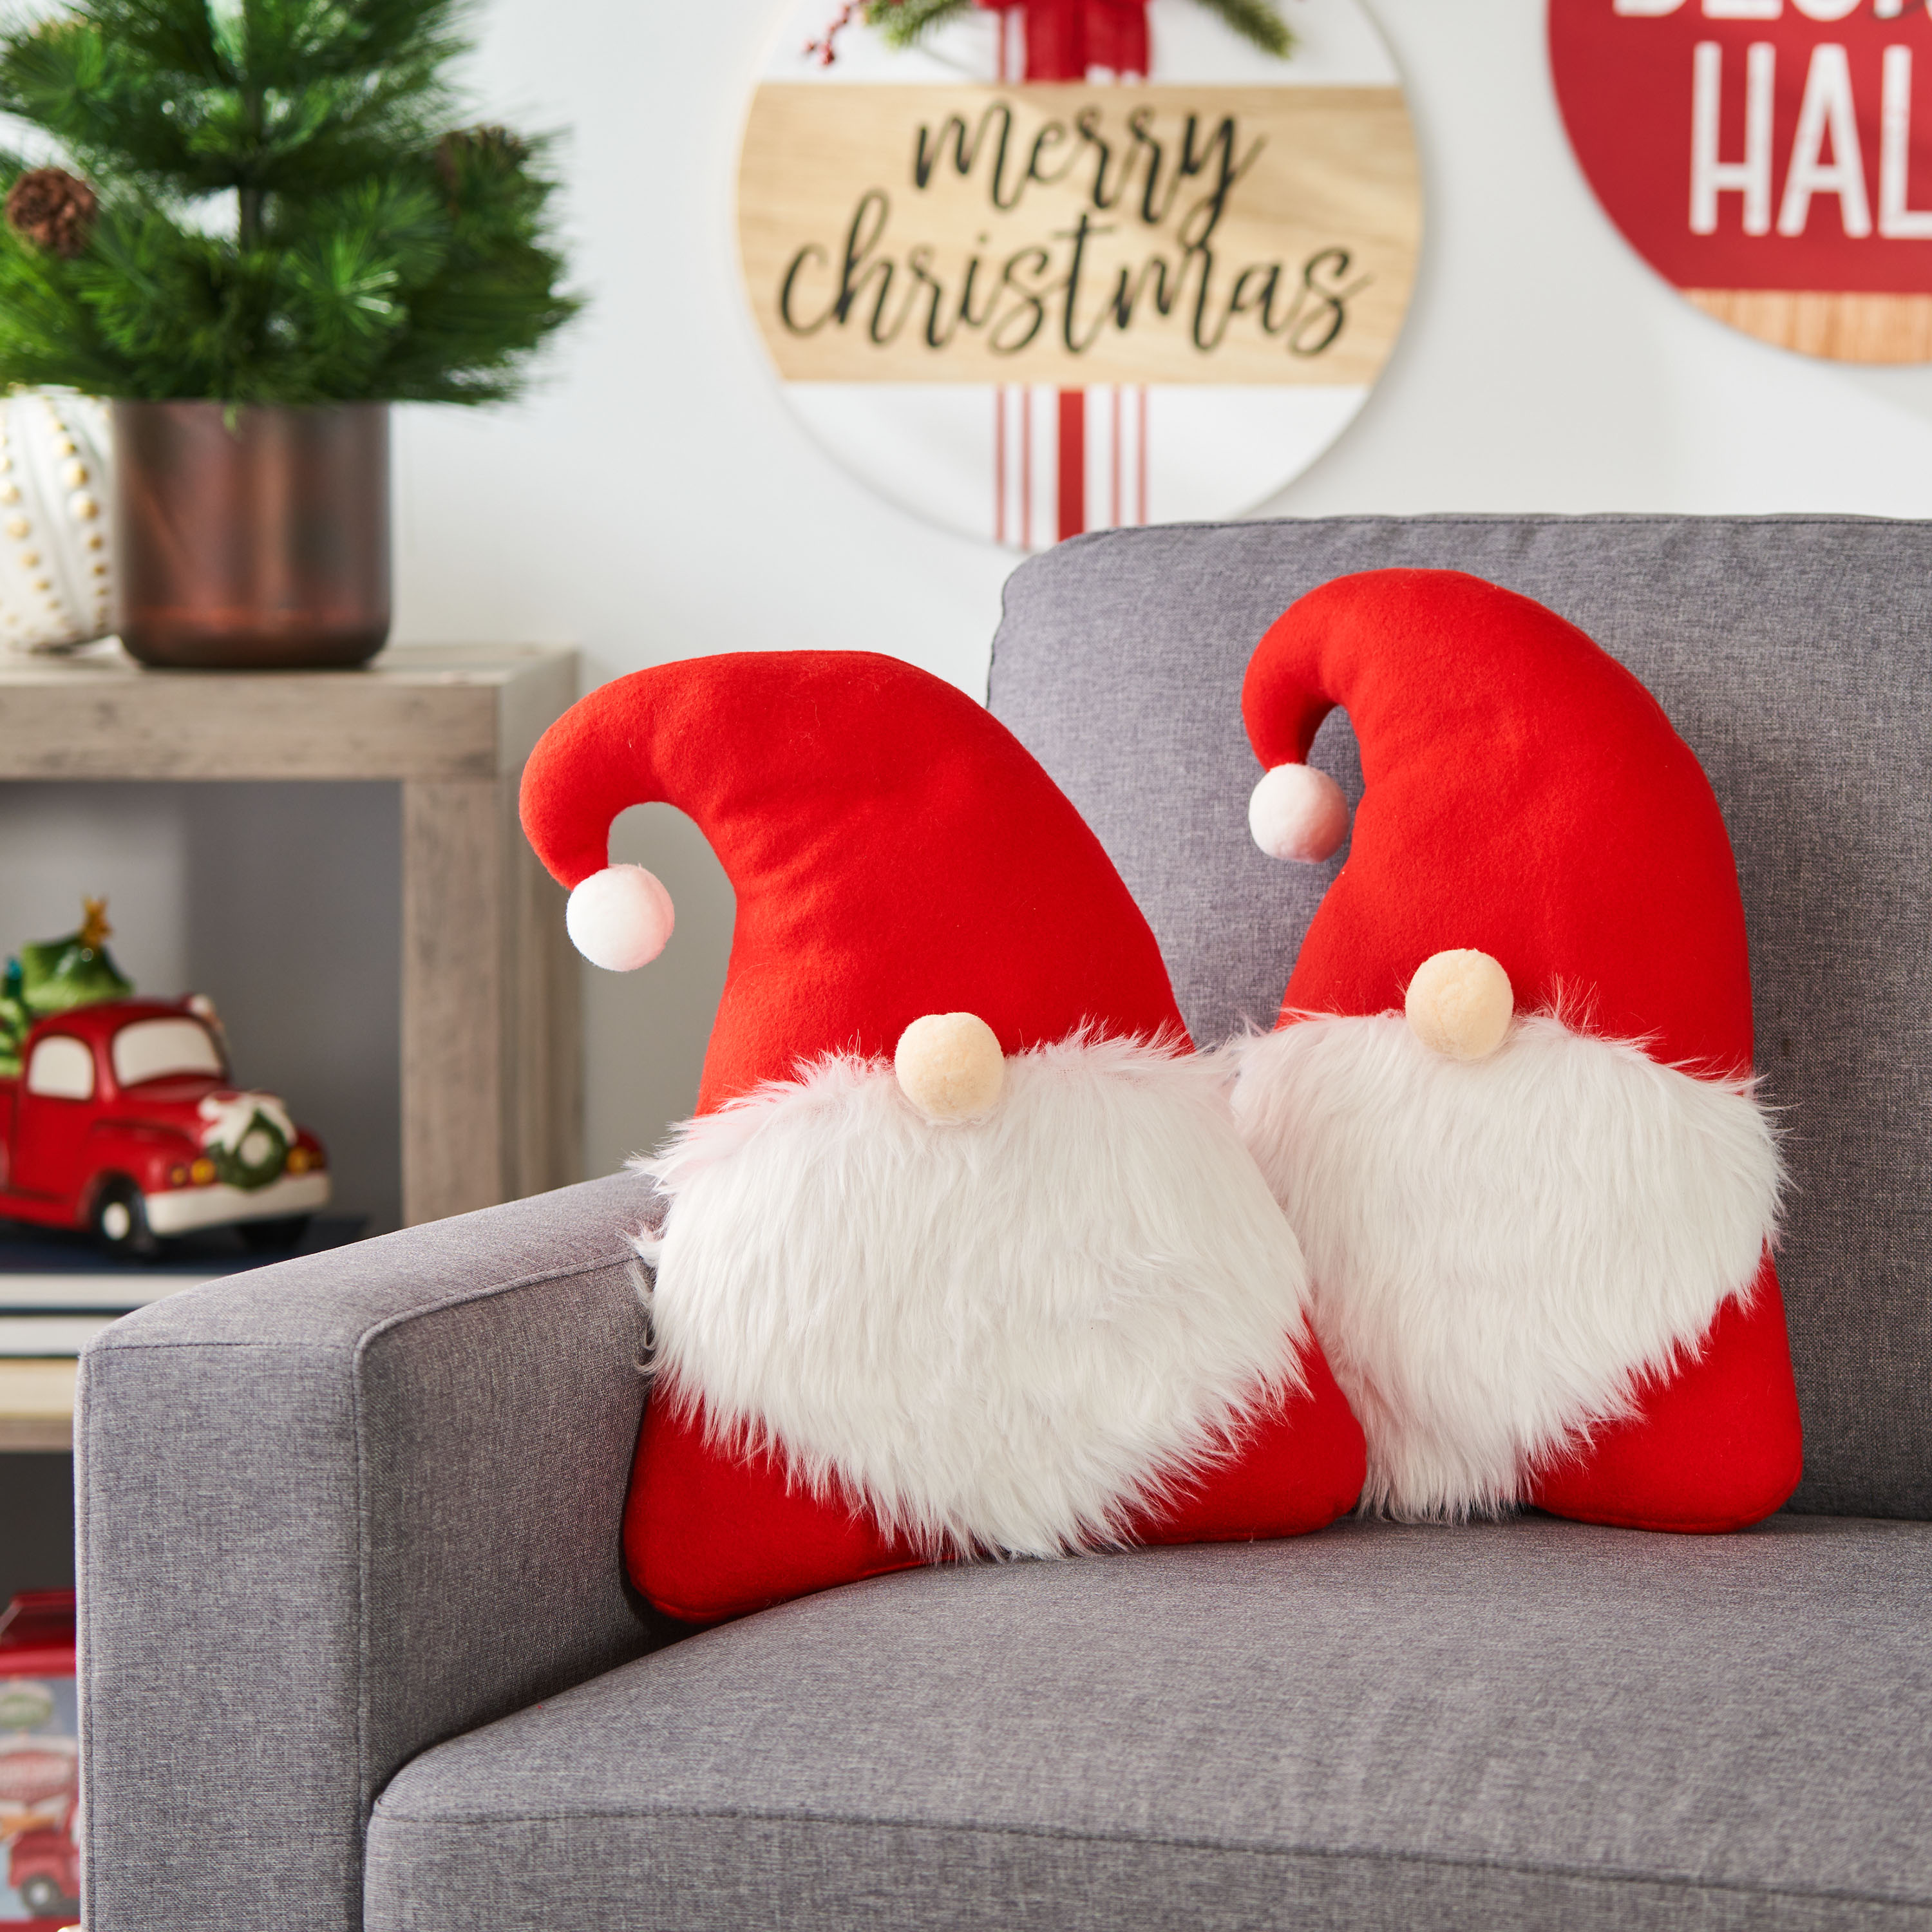 Holiday Time Christmas 13.5 inch Red Gnome Decorative Pillows Plush, 2-pack - image 5 of 6